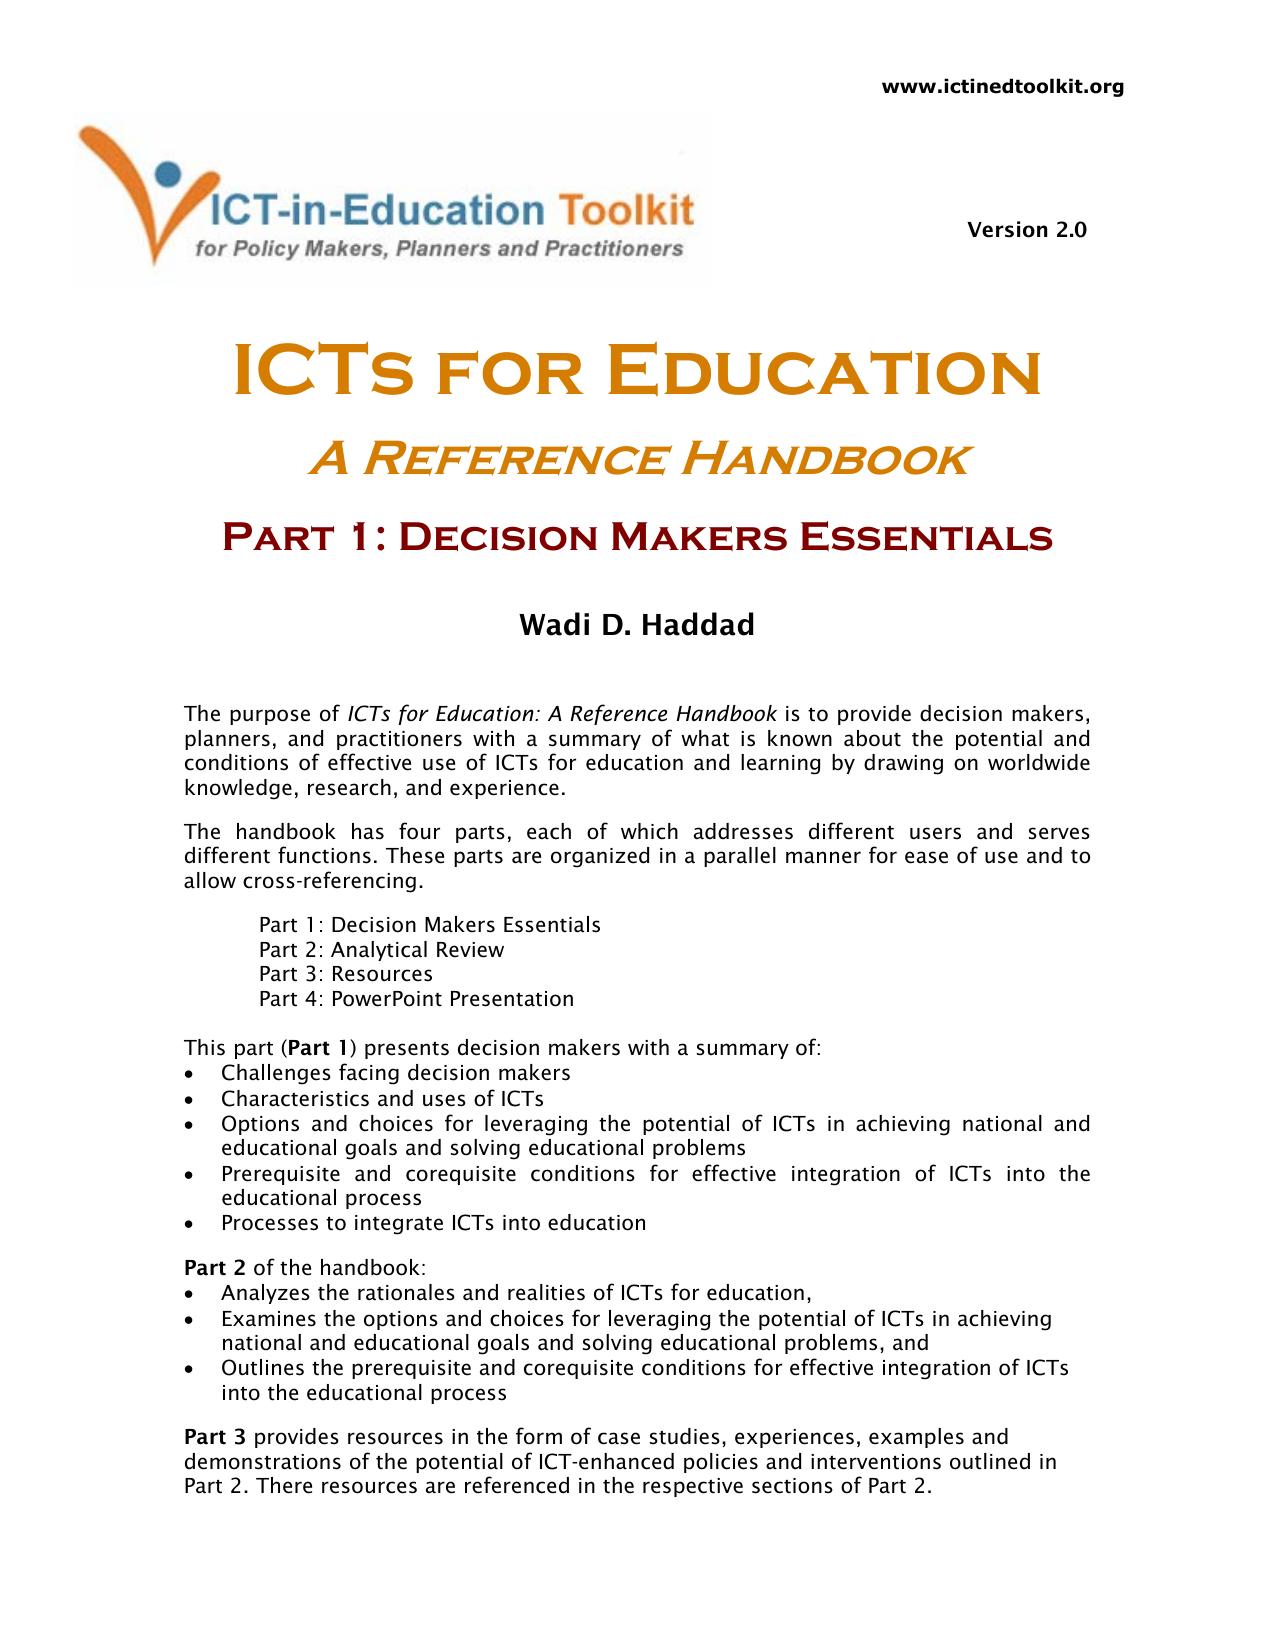 ICTs for Education